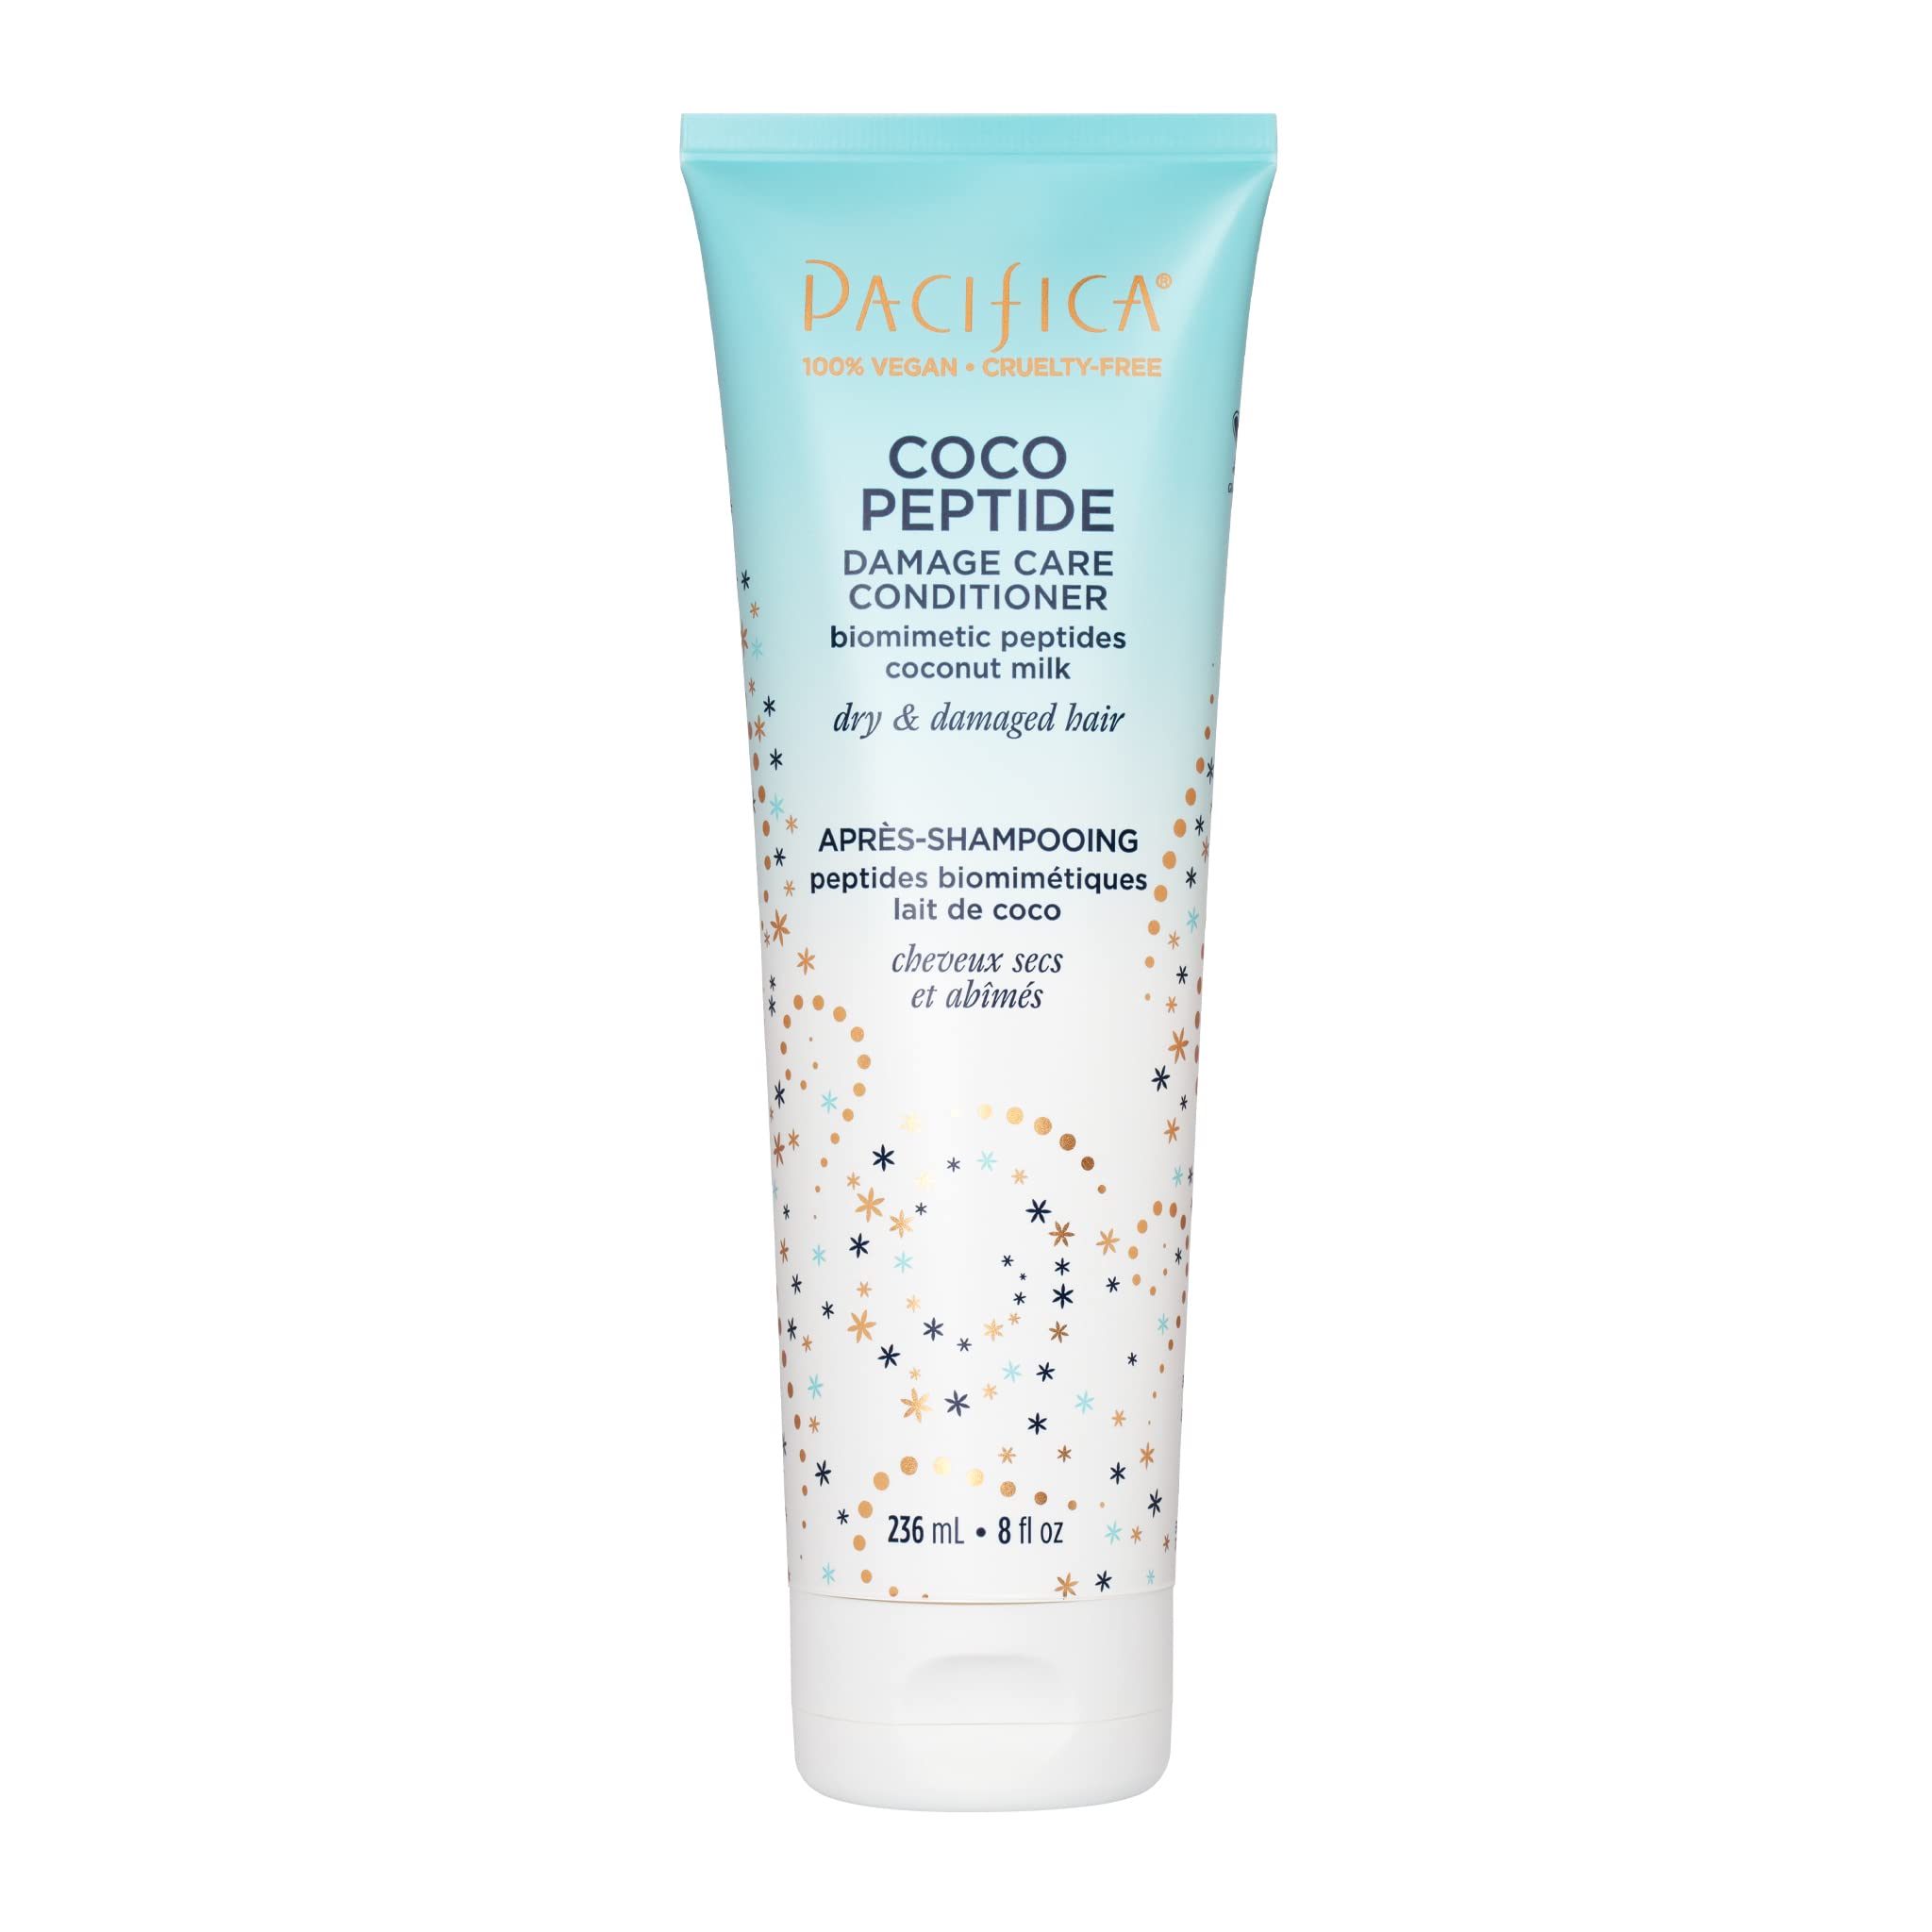 Pacifica Beauty, Coco Peptide Damage Care Conditioner, Dry & Damaged Hair, Repair Damage from Bleach, Color, Chemical Services, Chlorine, & Heat, Coconut, Vitamin B5, Peptide, Split Ends & Breakage